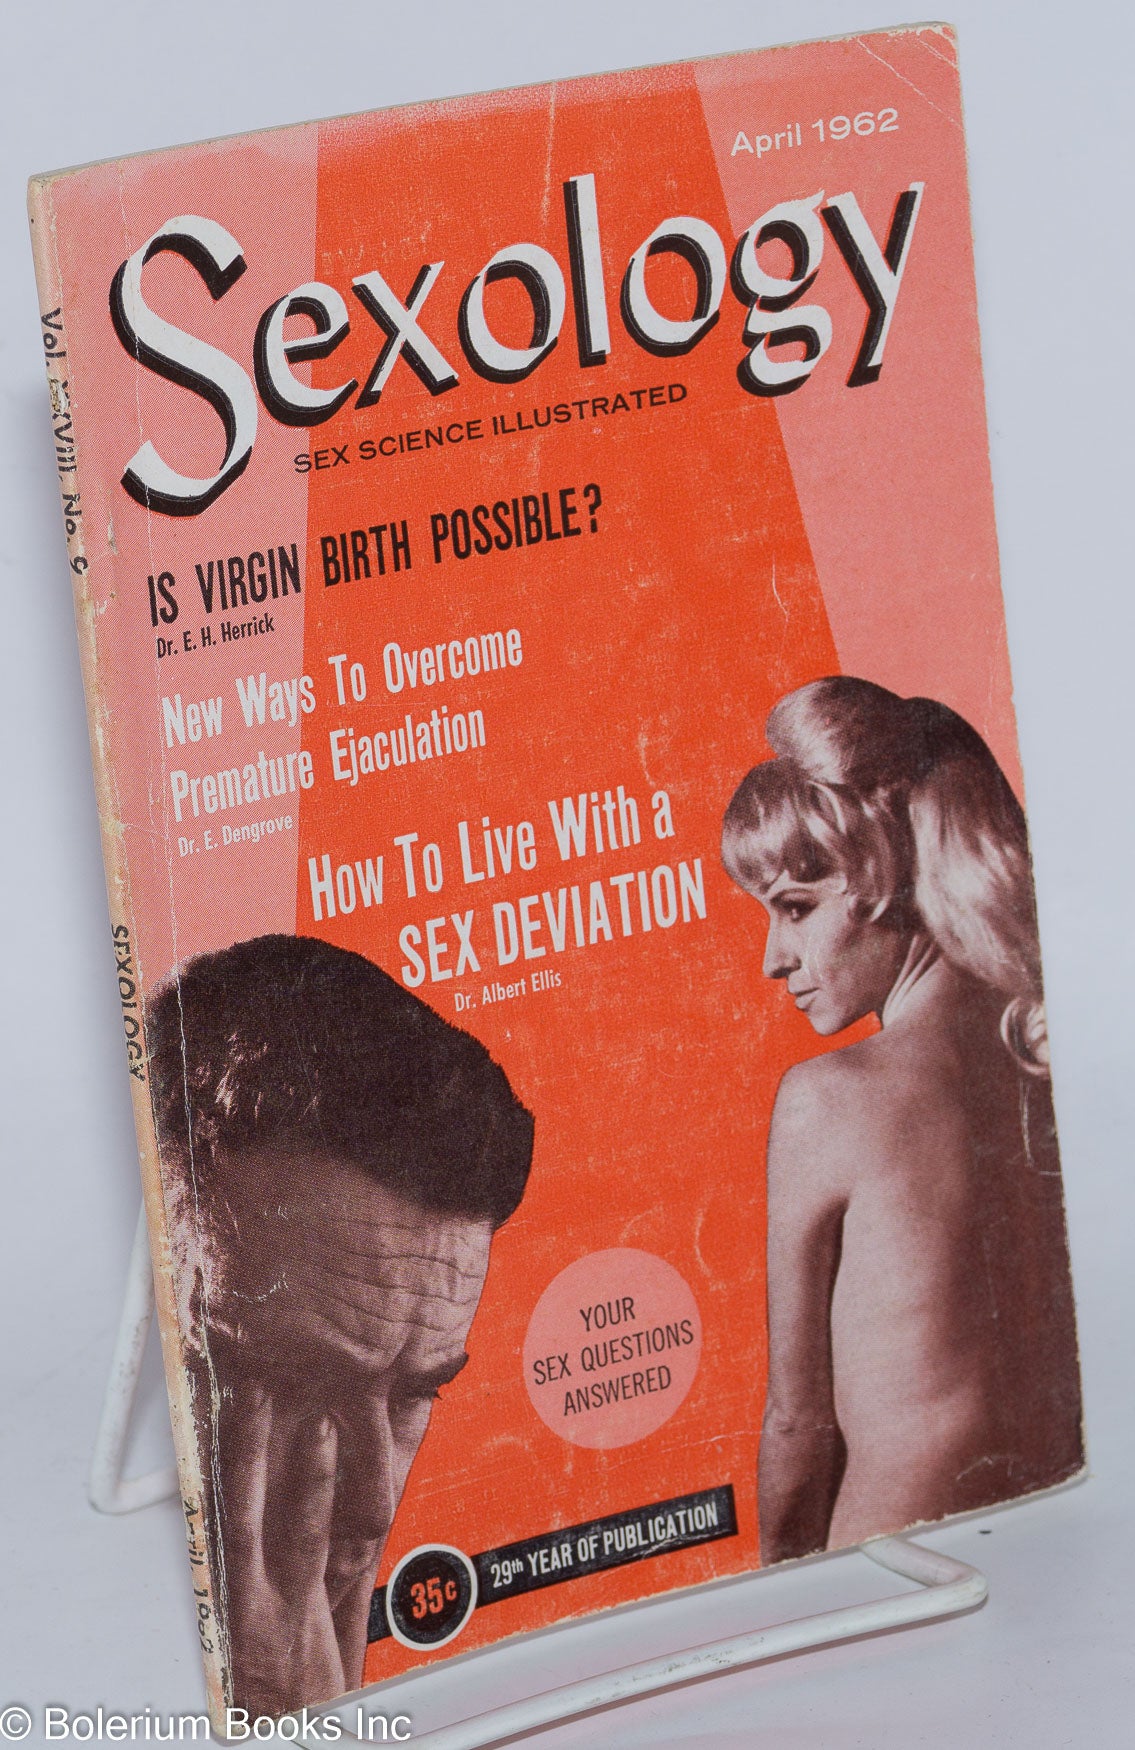 Sexology Sex Science Illustrated Vol 28 9 April 1962 How To Live With A Sex Deviation 